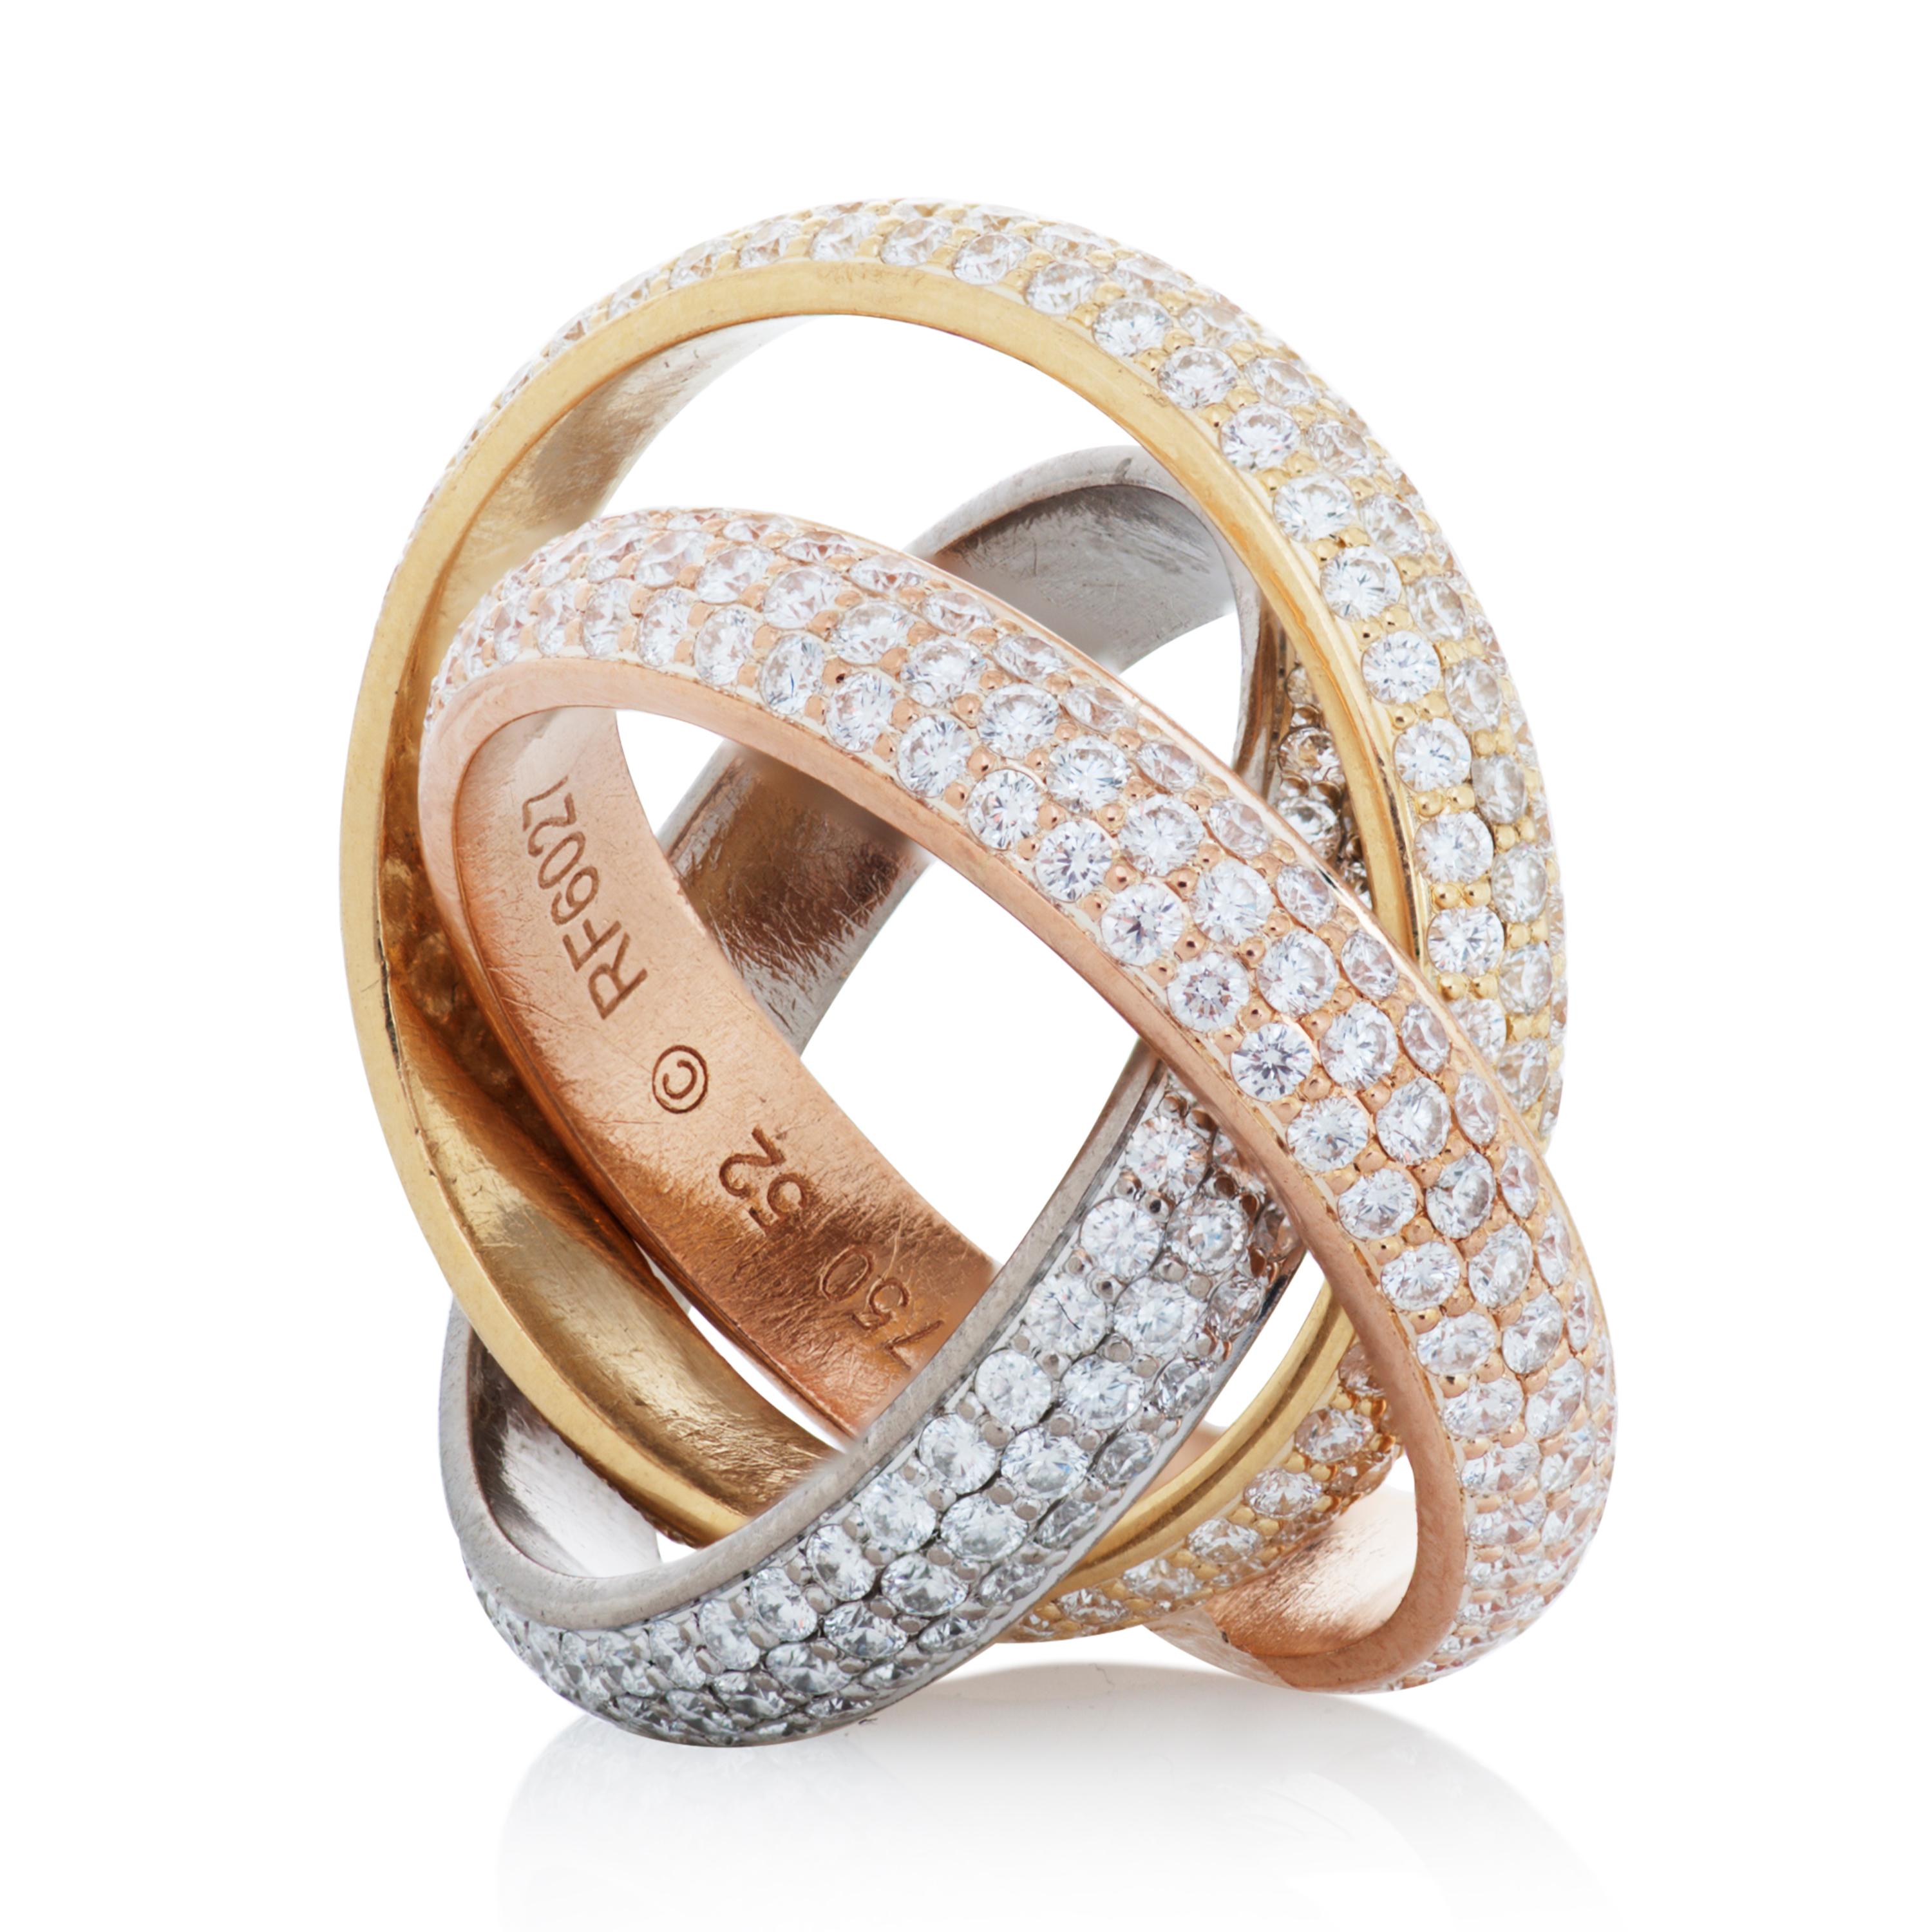 Cartier classic model diamond Trinity rolling ring in 18k white, yellow and rose gold. 

This Cartier ring features 3 interlocking bands pave set with approximately 2.98 carats of round brilliant cut diamonds, it is accompanied by Cartier box.